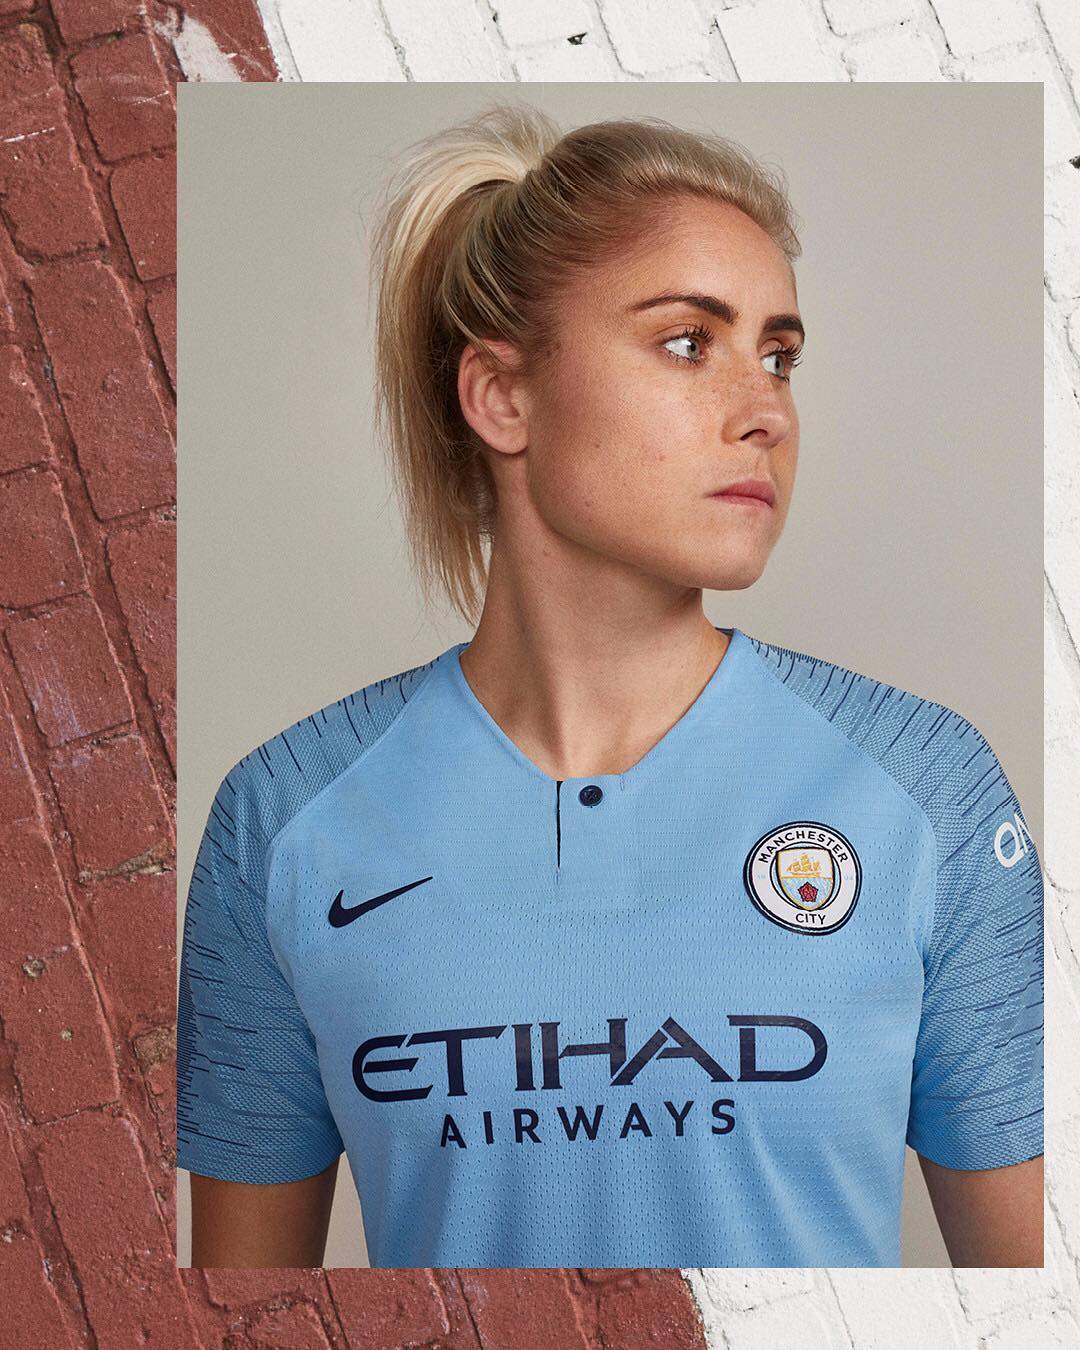 51 Hot Pictures Of Steph Houghton Will Heat Up Your Blood With Fire And Energy For This Sexy Diva 427